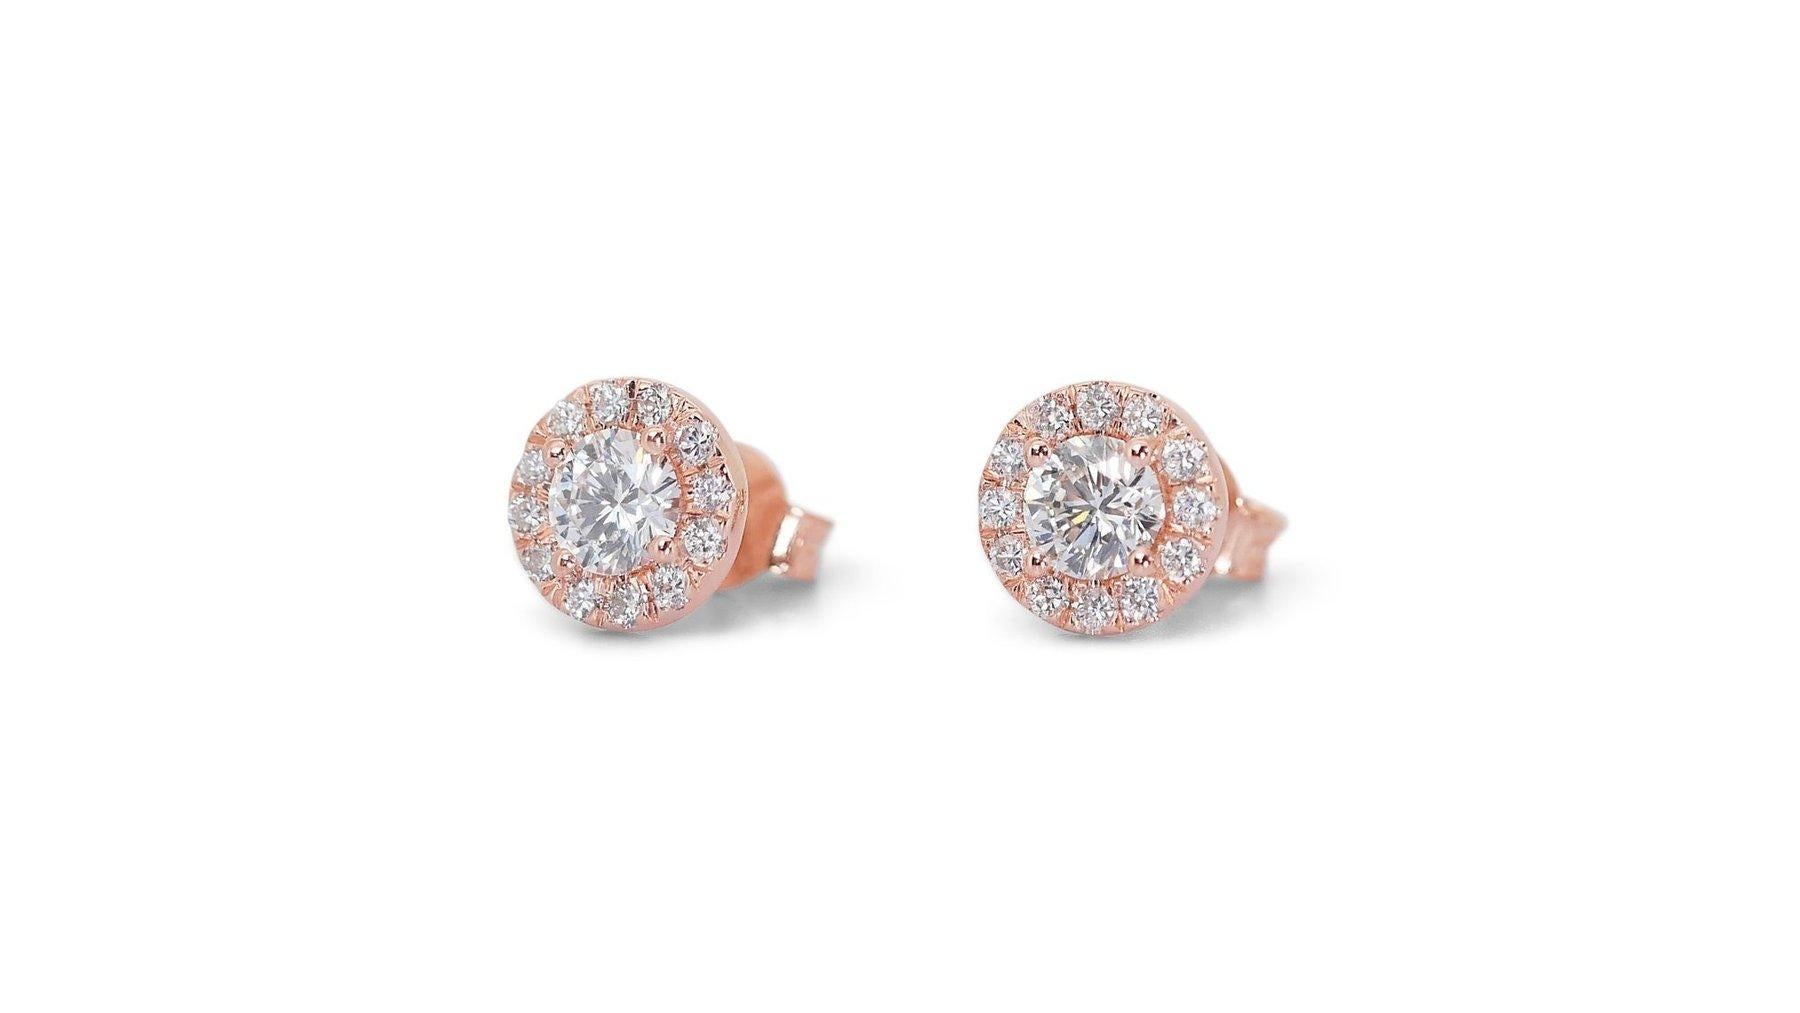 Lustrous 18k Rose Gold Natural Diamond Halo Stud Earrings w/1.78 ct - GIA Certified

Immerse yourself in captivating sparkle with these mesmerizing diamond halo stud earrings, crafted in luxurious 18k rose gold. These stud earrings features a